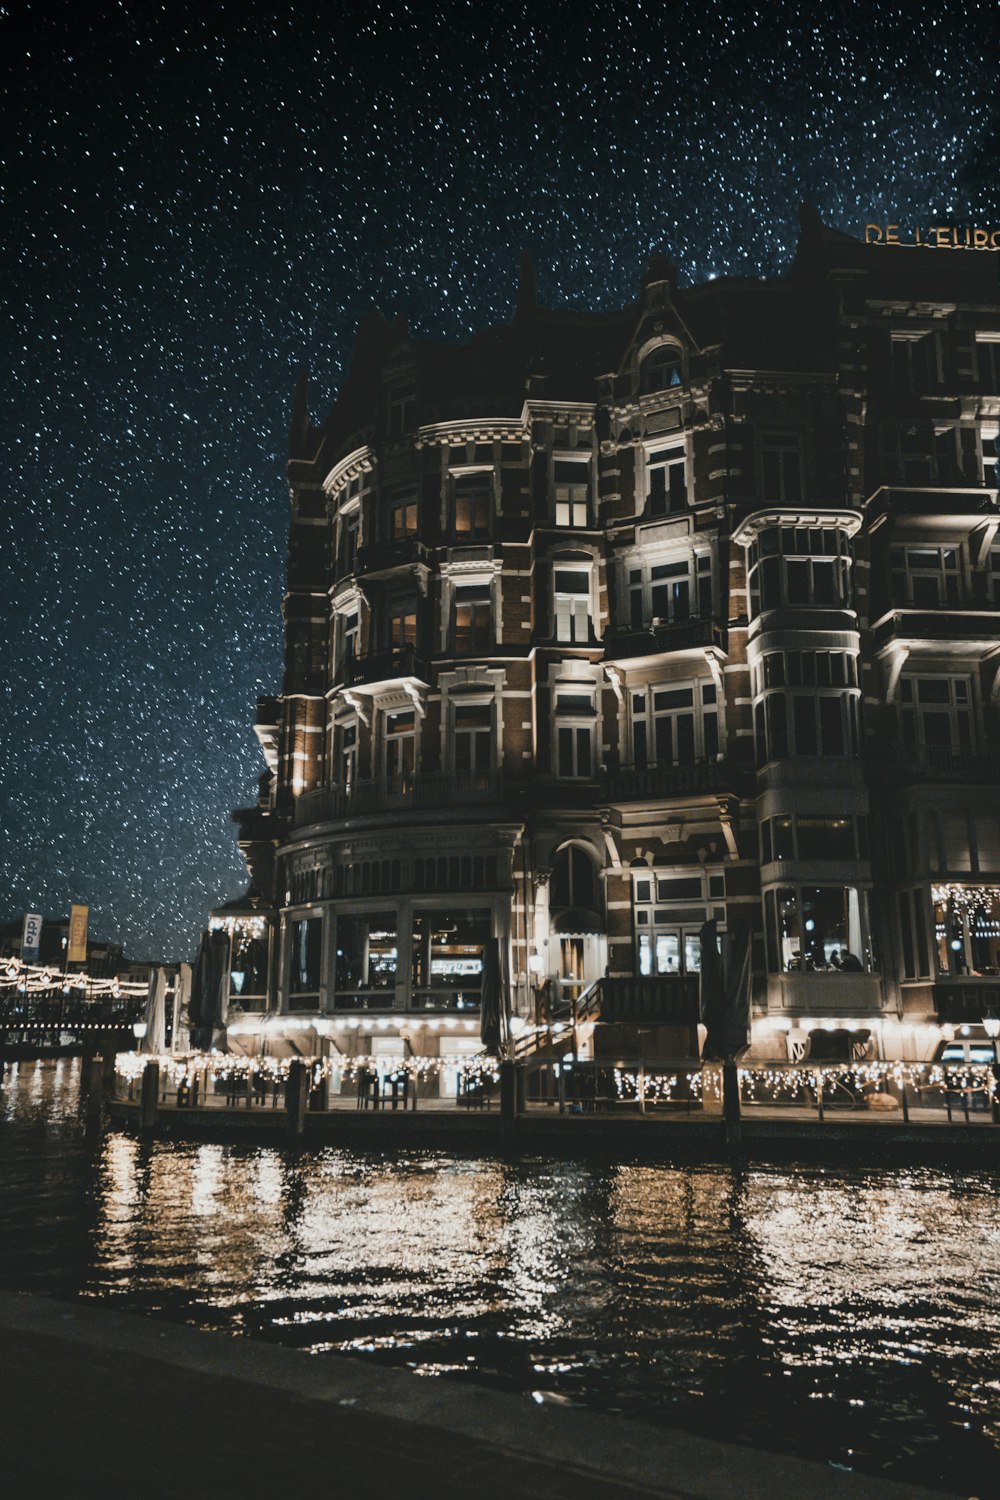 starry night sky over store building along the river